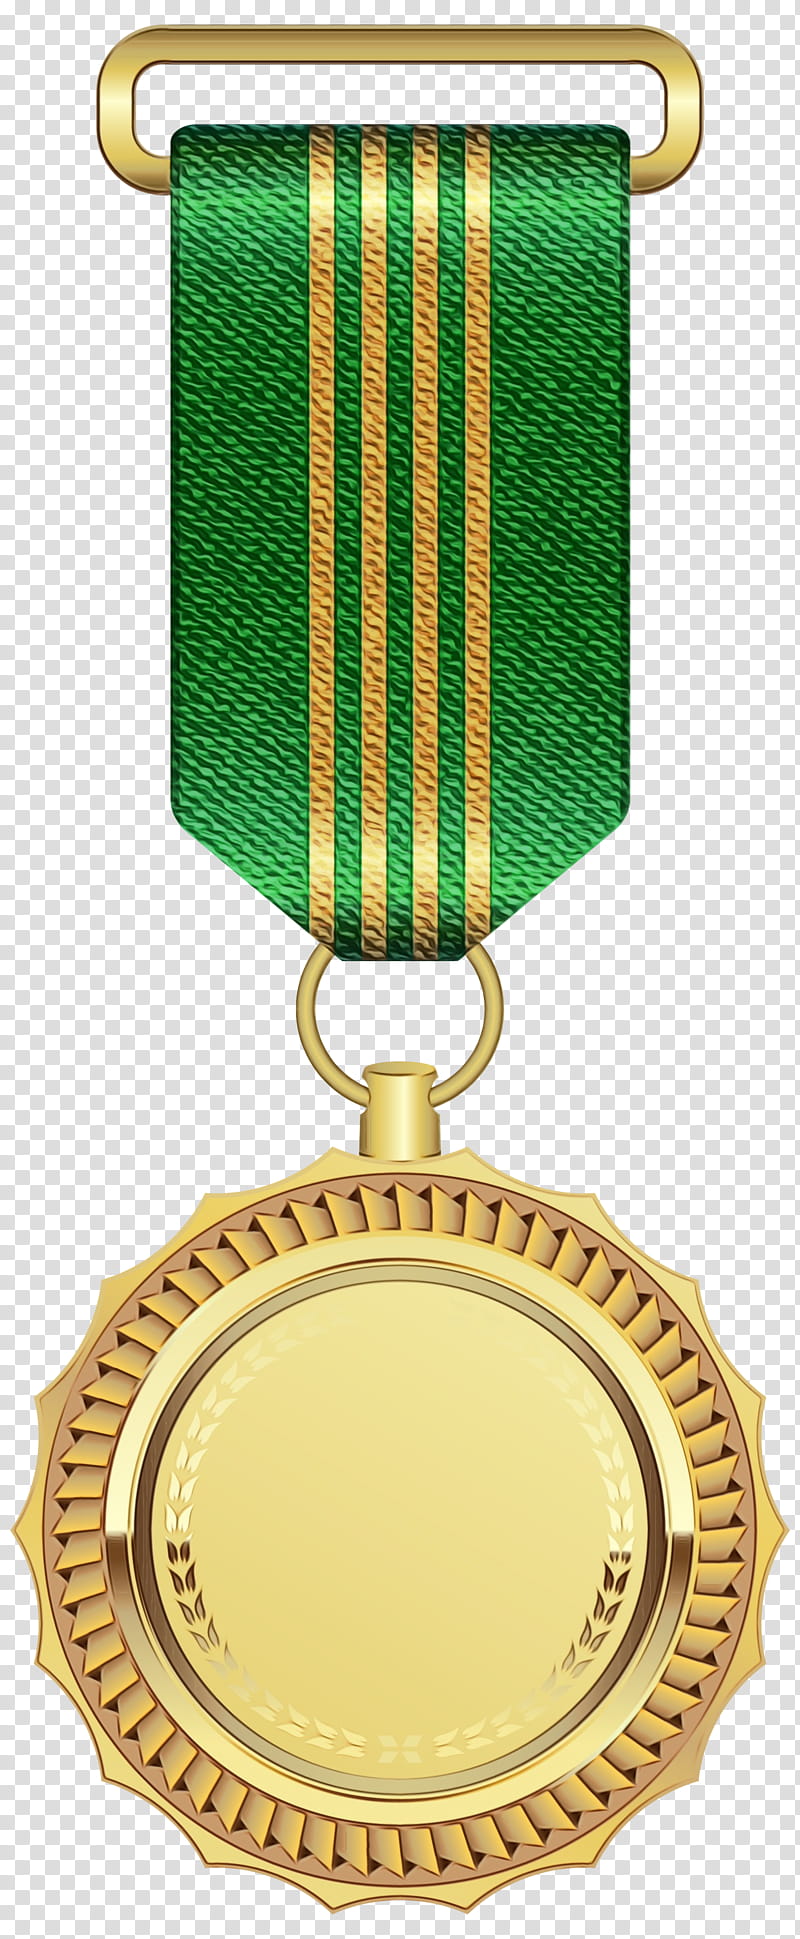 Green Background Ribbon, Medal, Gold Medal, BORDERS AND FRAMES, Trophy, Green Ribbon, Award Or Decoration, Yellow transparent background PNG clipart